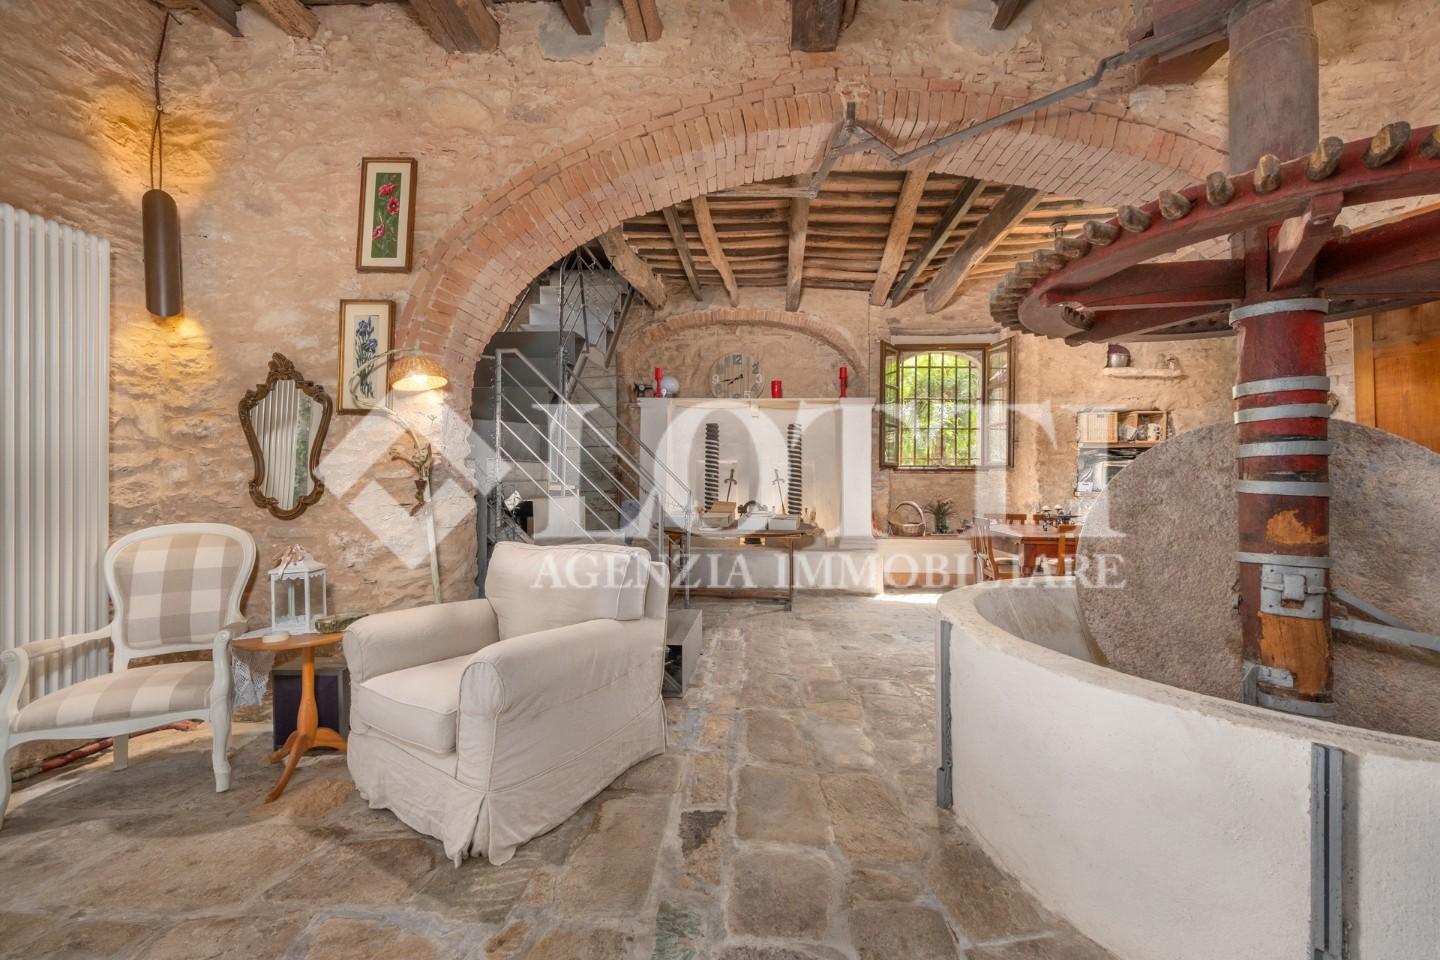 Apartment for sale in Panicale, Buti (PI)